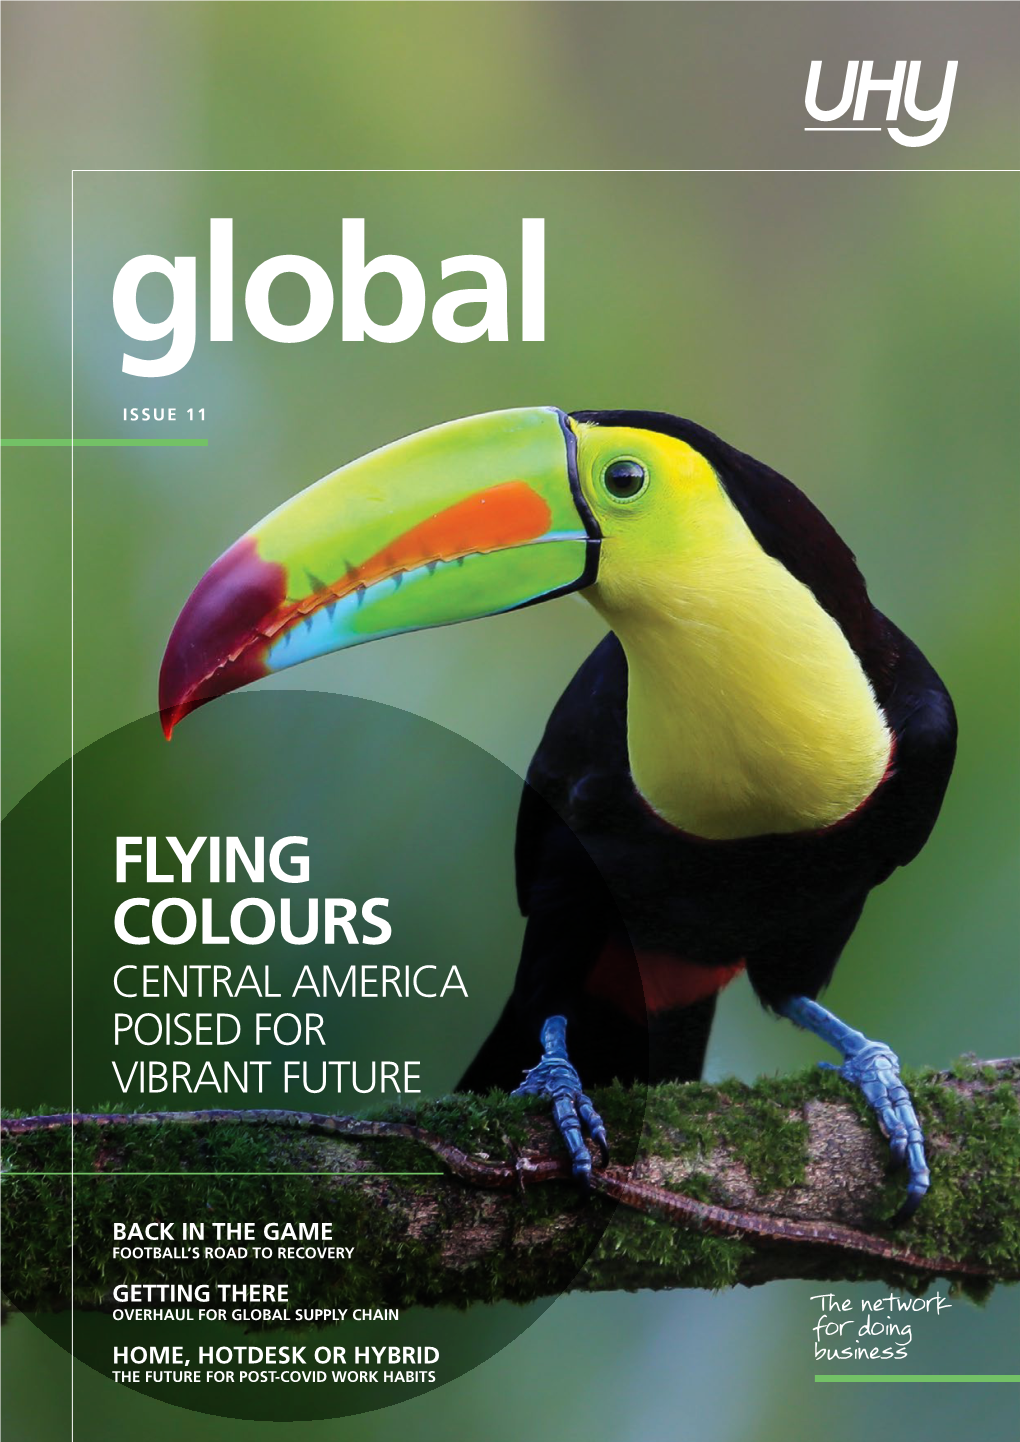 UHY Global Magazine Issue 11: Flying Colours